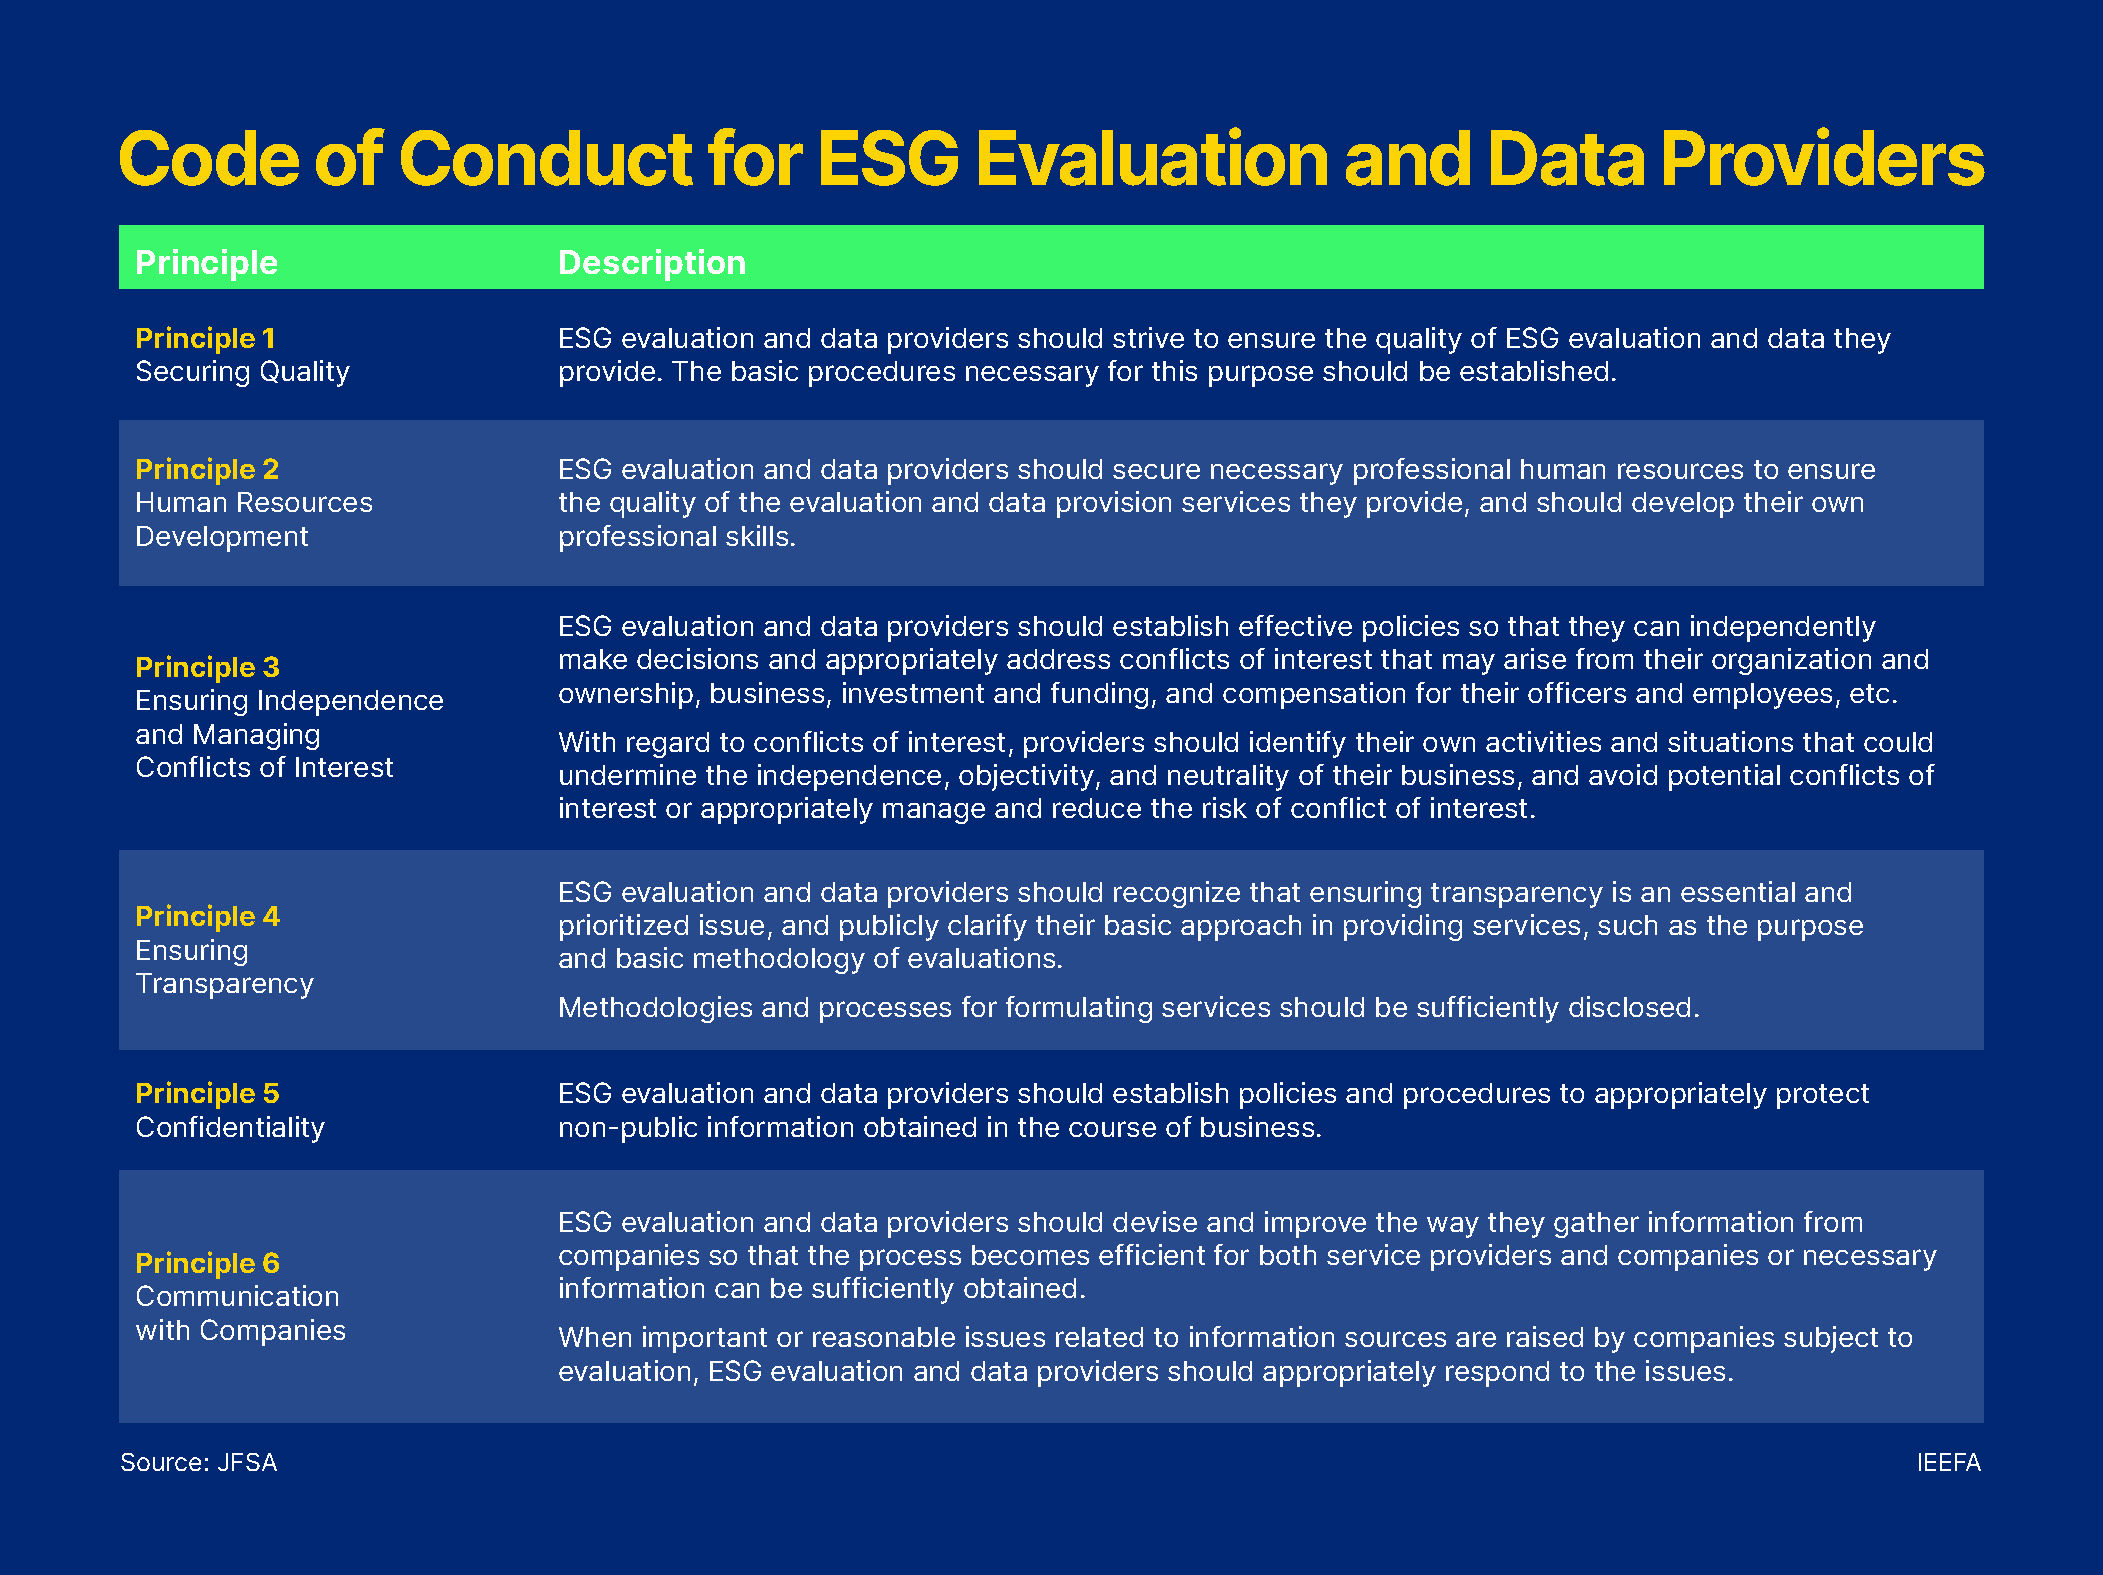 Code of conducts for ESG evaluation